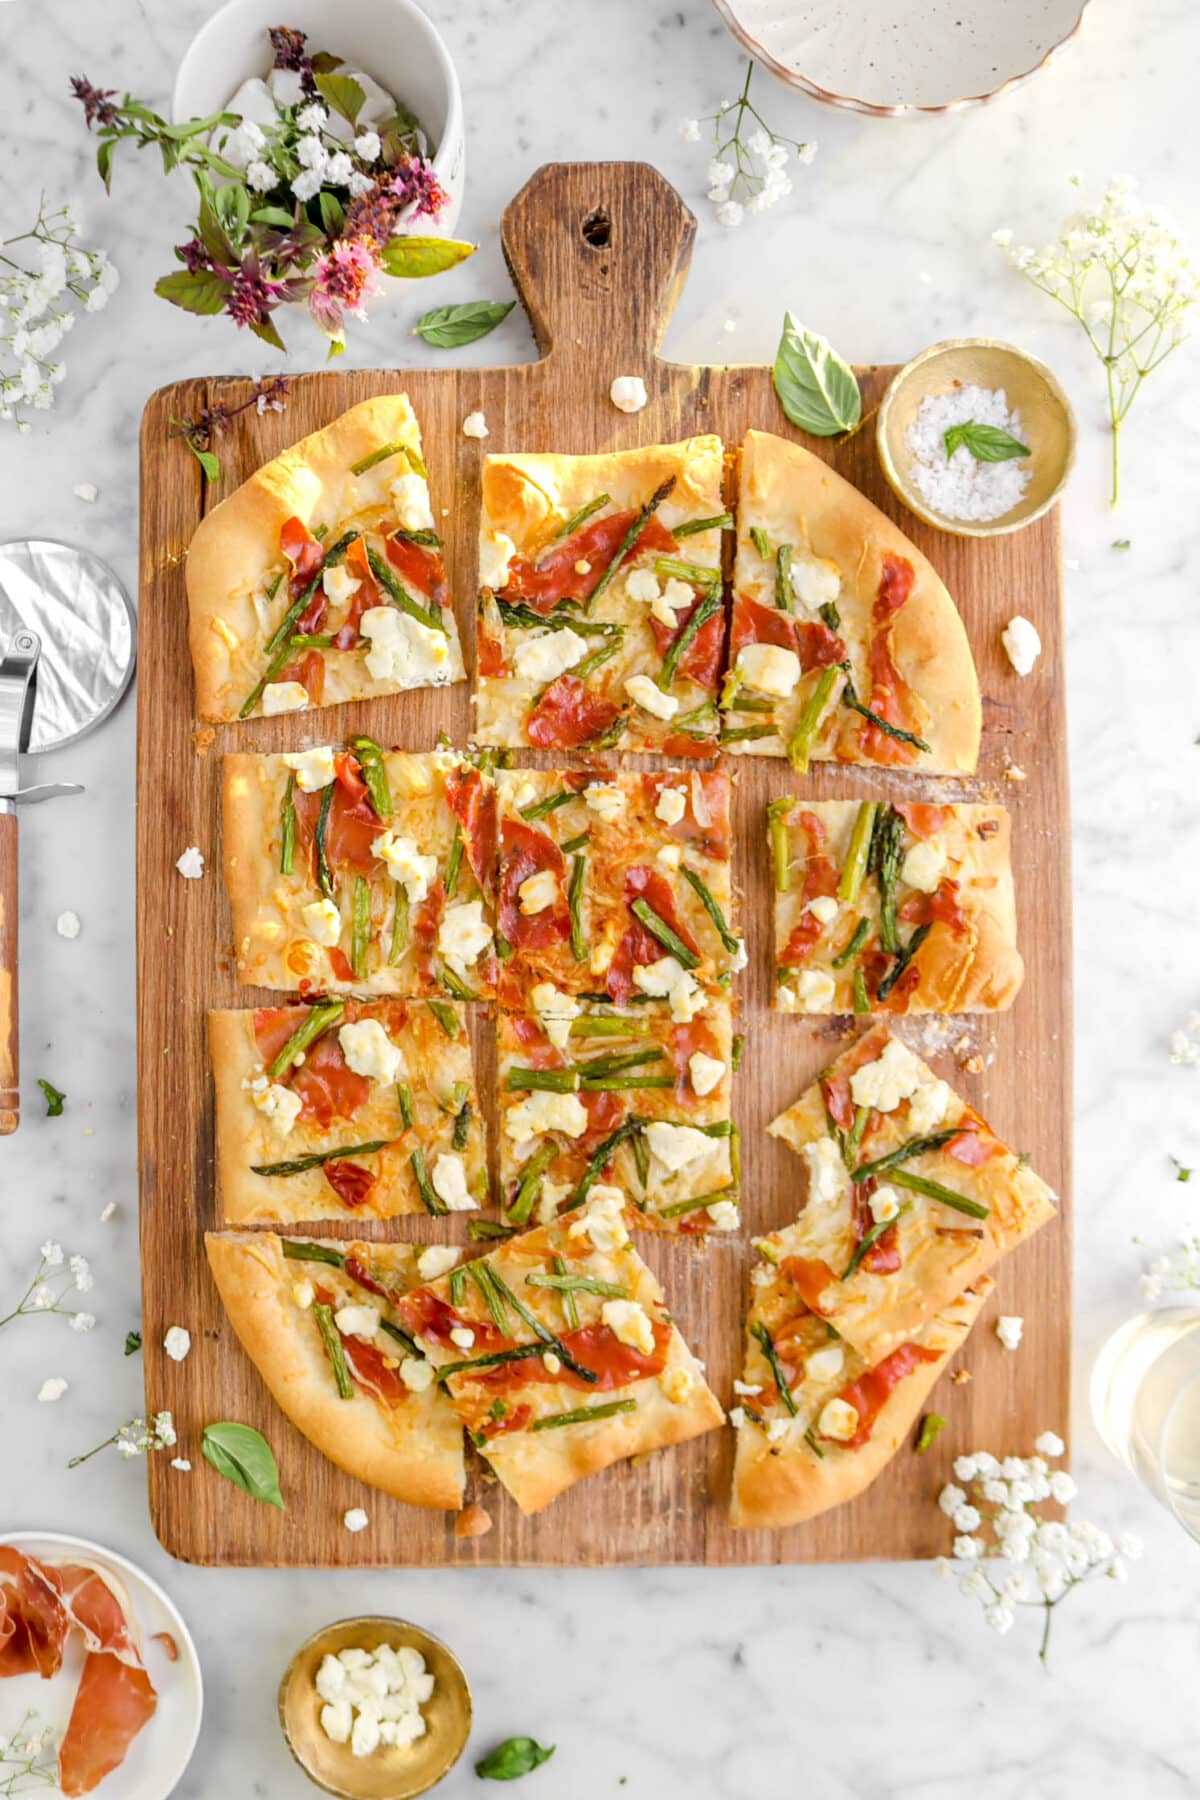 sliced asparagus and prosciutto flatbread on wood board with one slice missing a bite, a gold bowl beside, fresh flowers, and basil leaves around on marble surface.